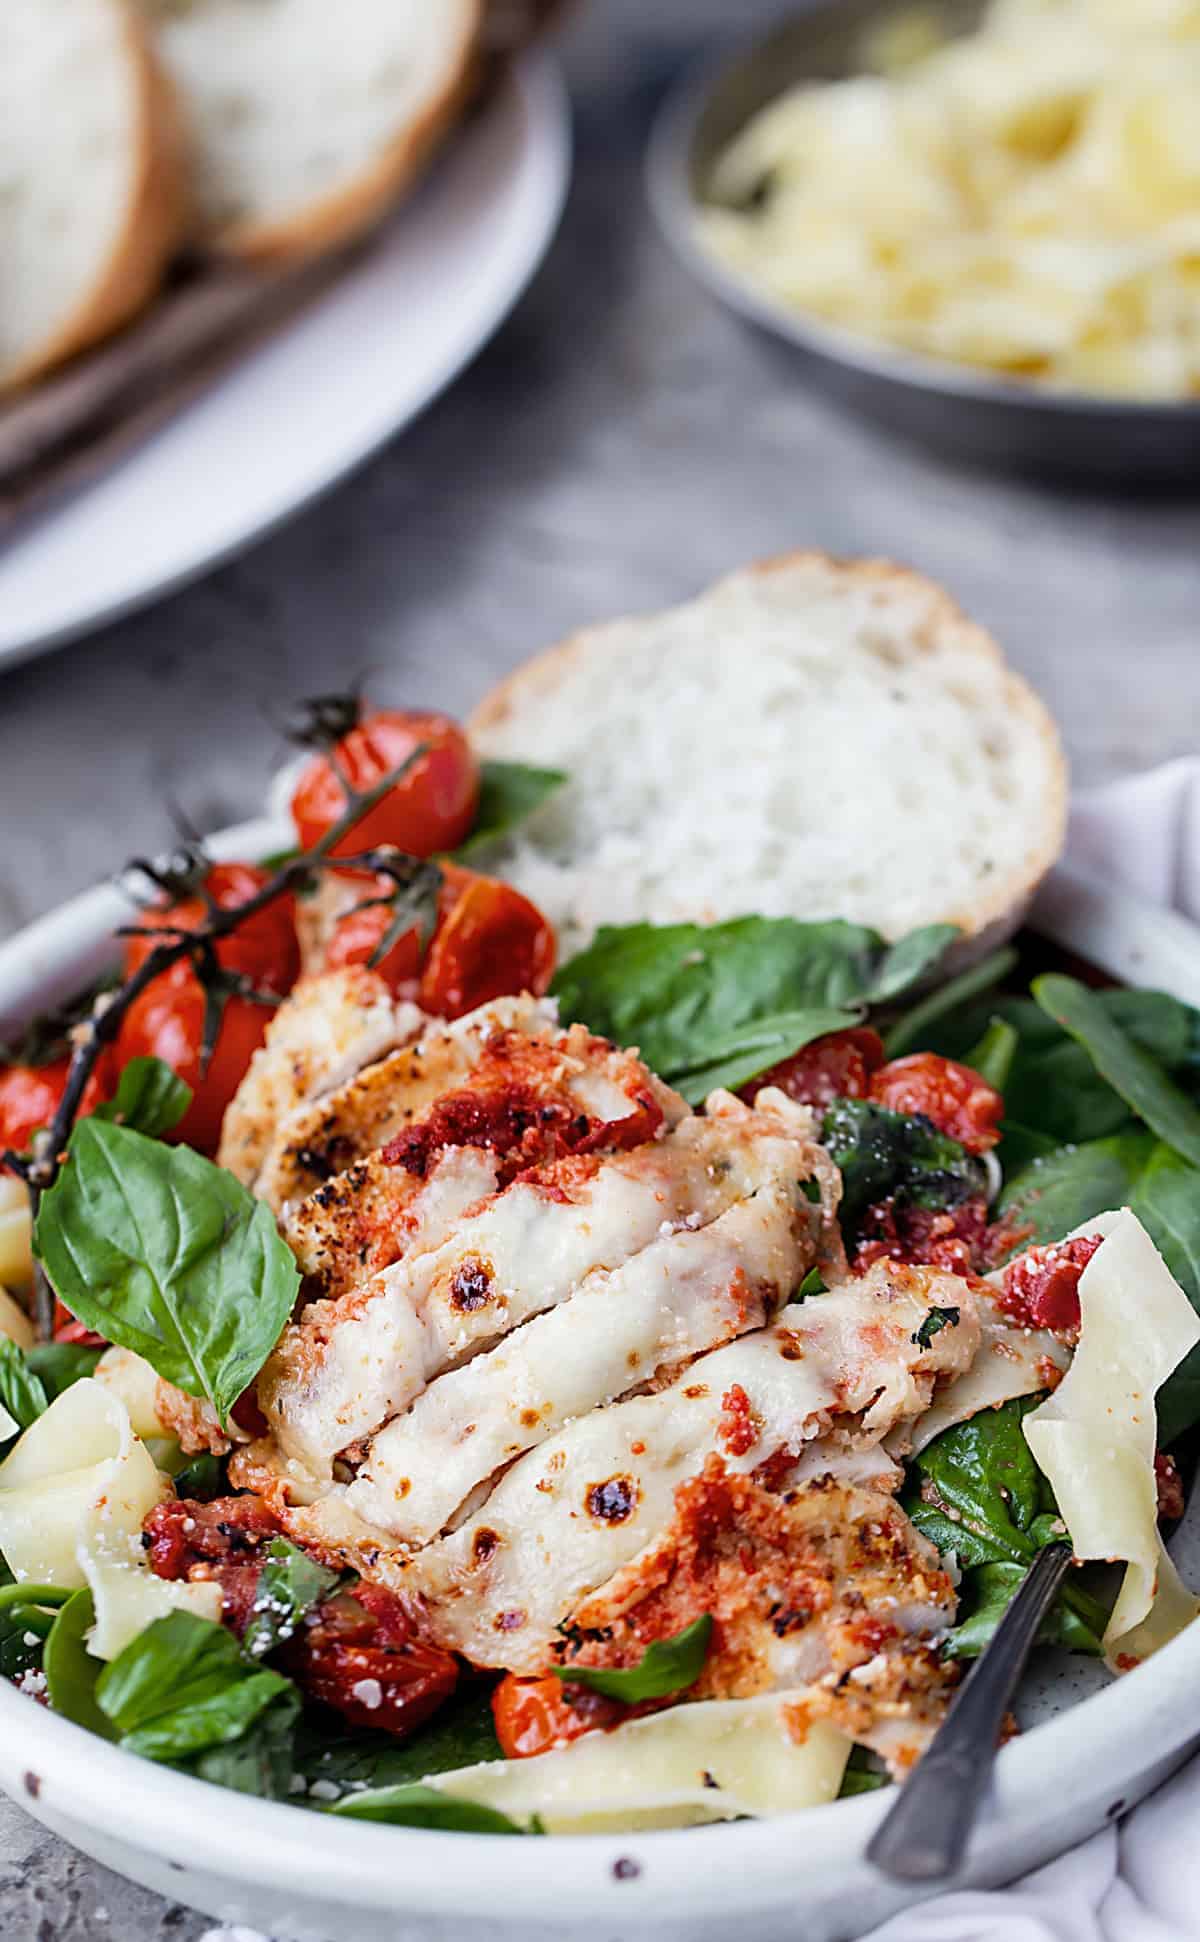 Easy One – Tray Baked Chicken Parmesan with Roasted Tomato Sauce is full of garlic, cheese, fresh herbs, and tomato sauce with bursted tomatoes and deep rich flavor. | easy baked chicken parmesan recipe | parmesan crusted tray bake chicken with lemon, garlic, pasta and spinach recipe #sponsored by @muirglen @thefeedfeed #MyMuirGlen #feedfeed